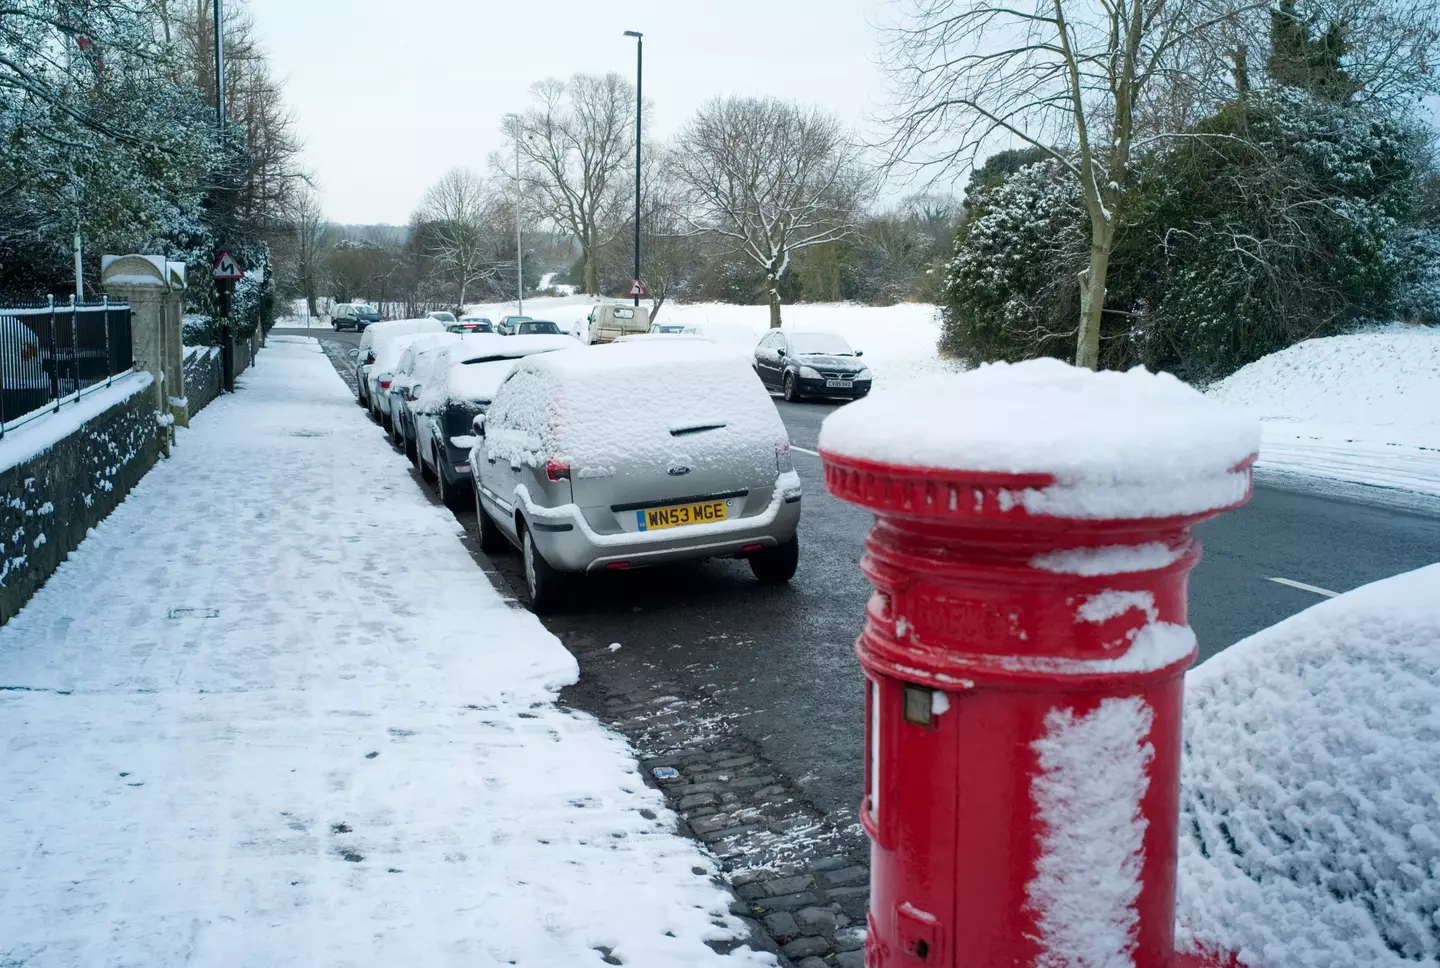 Parts of the UK will be hit with snow next week.